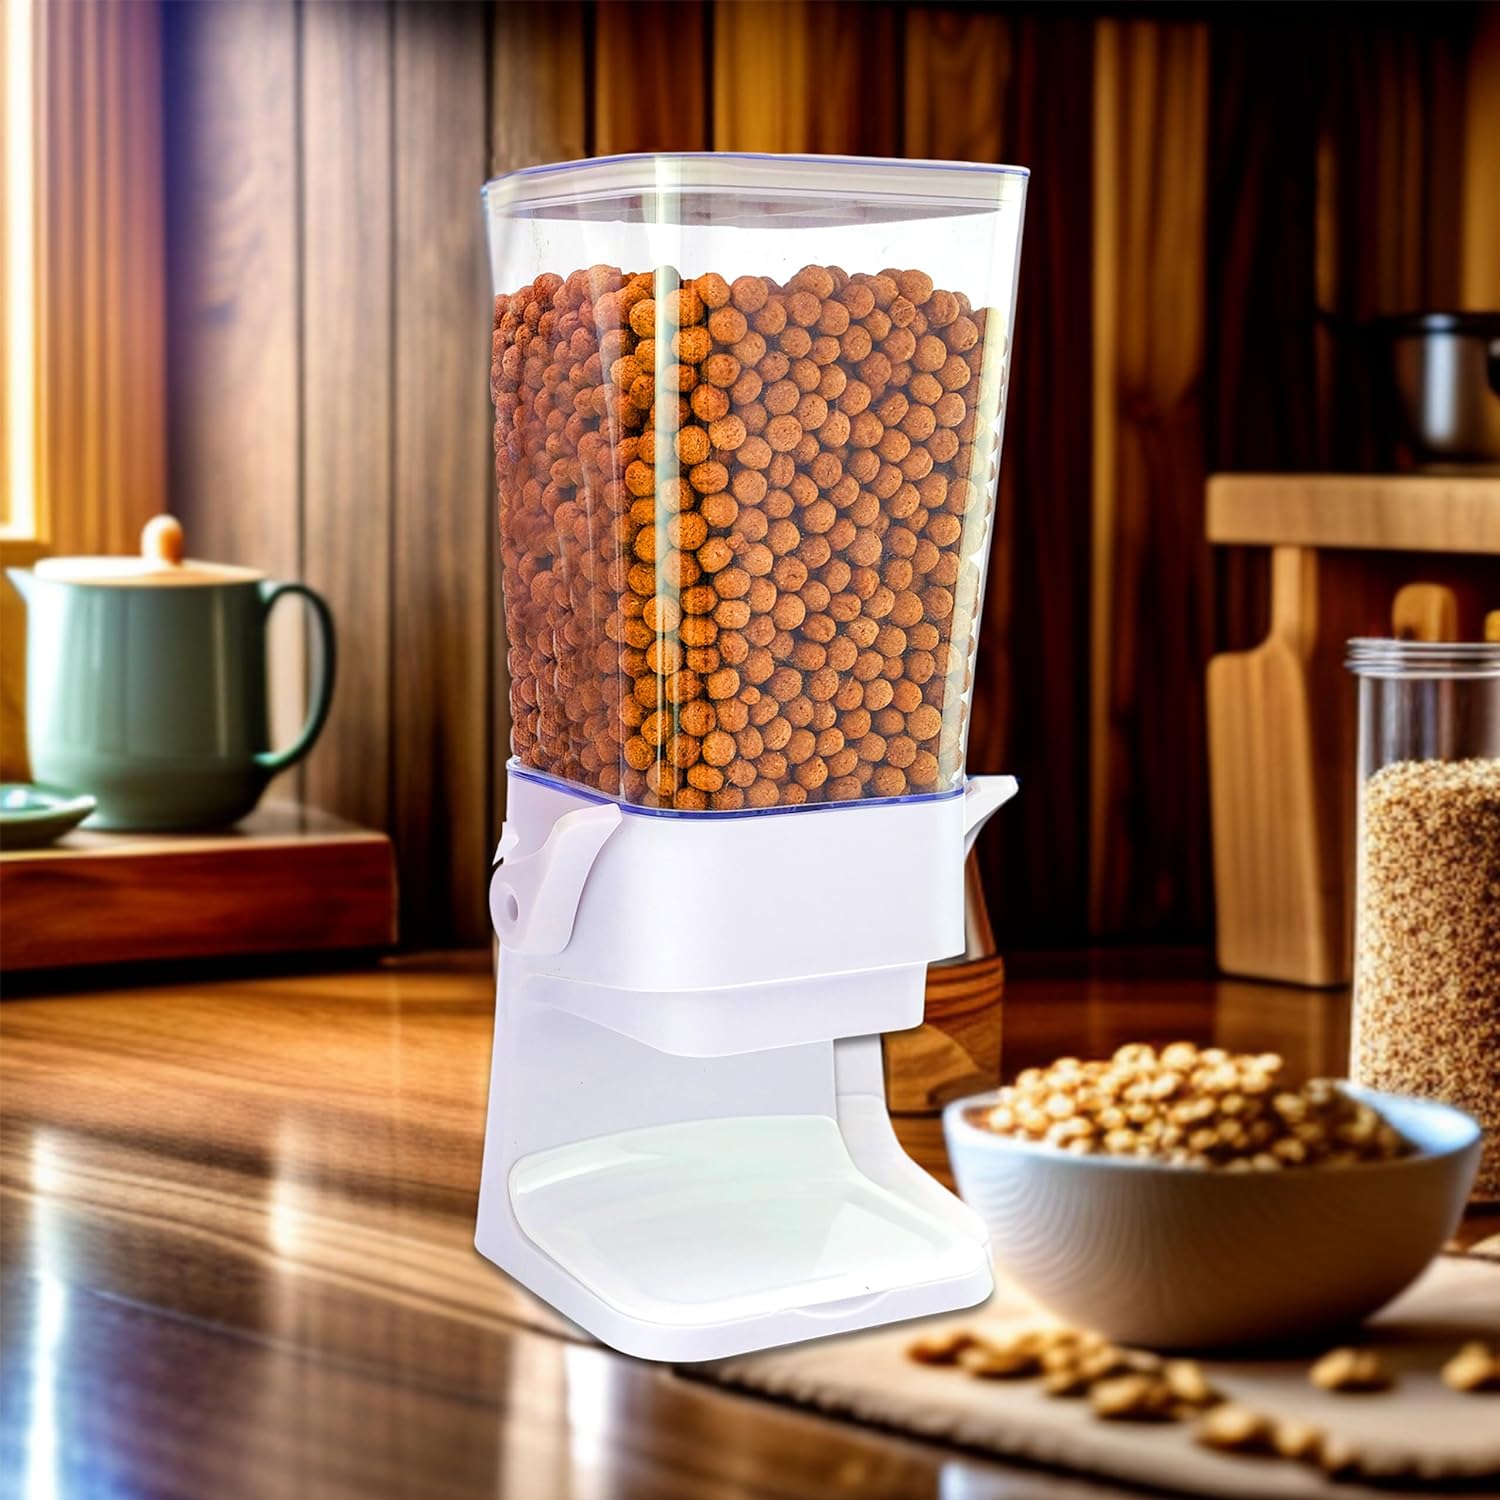 Are Cereal Dispensers Worth It?